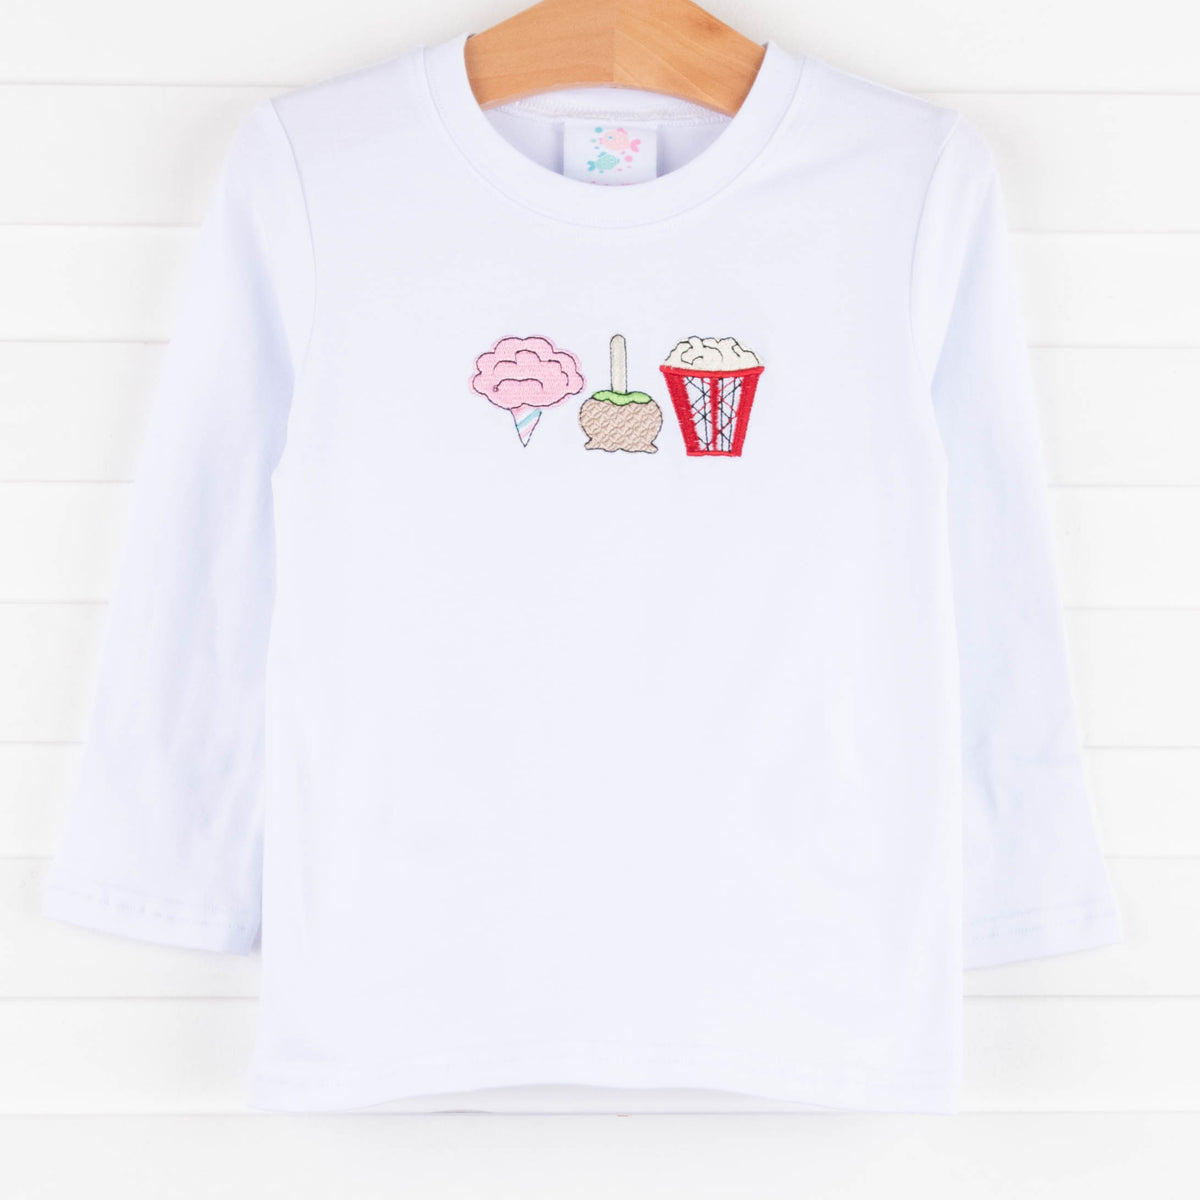 White Crew Neck T-Shirt - A stitch in time saves nine - Everyone CAN Craft  Shop